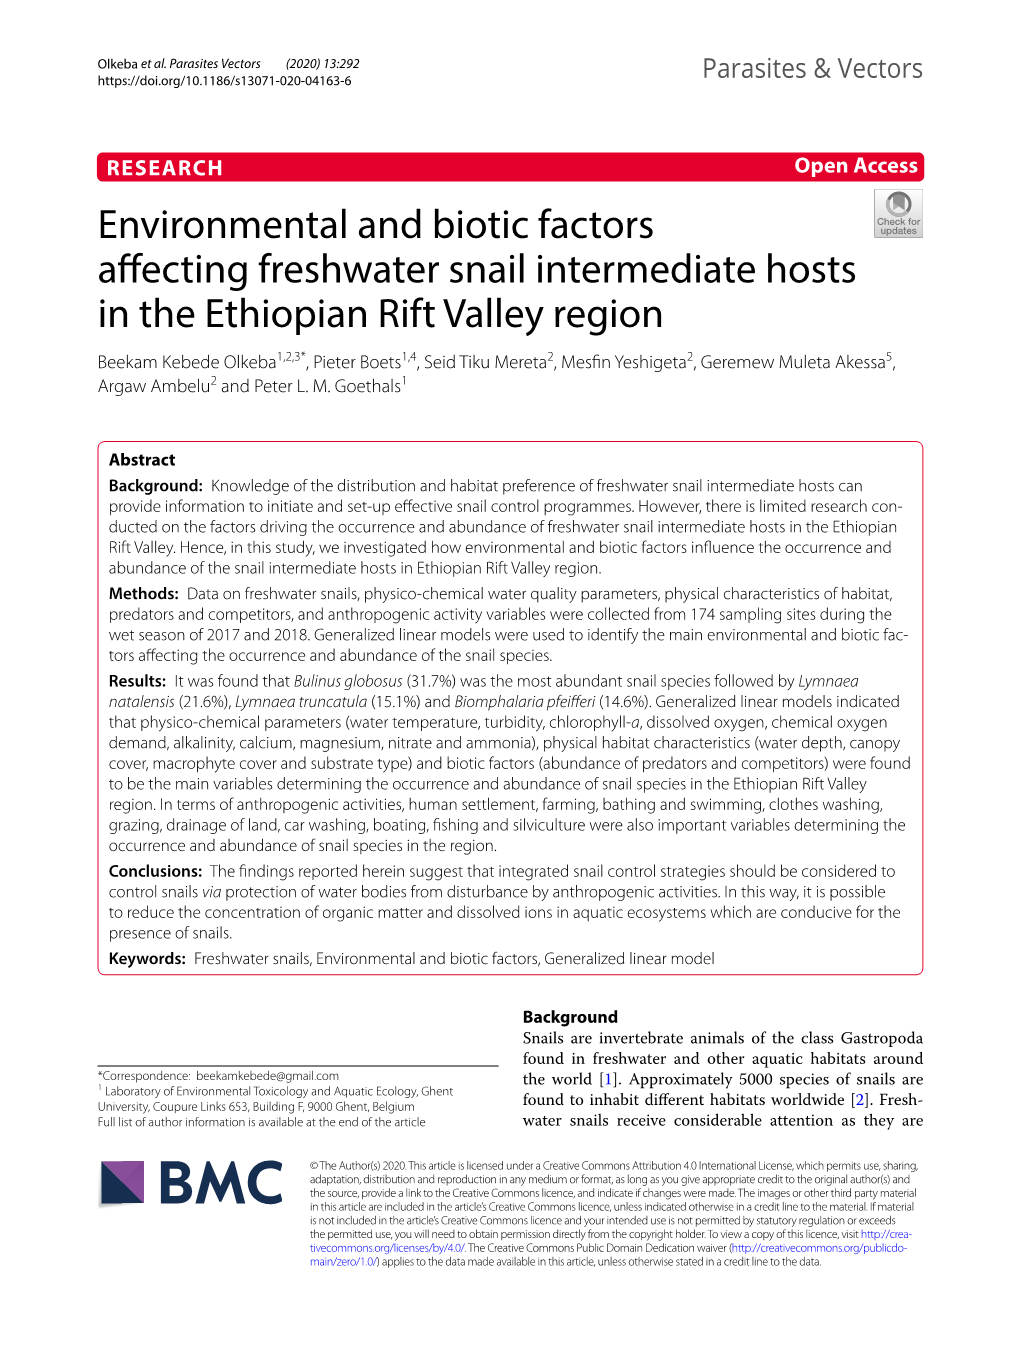 Environmental and Biotic Factors Affecting Freshwater Snail Intermediate Hosts in the Ethiopian Rift Valley Region